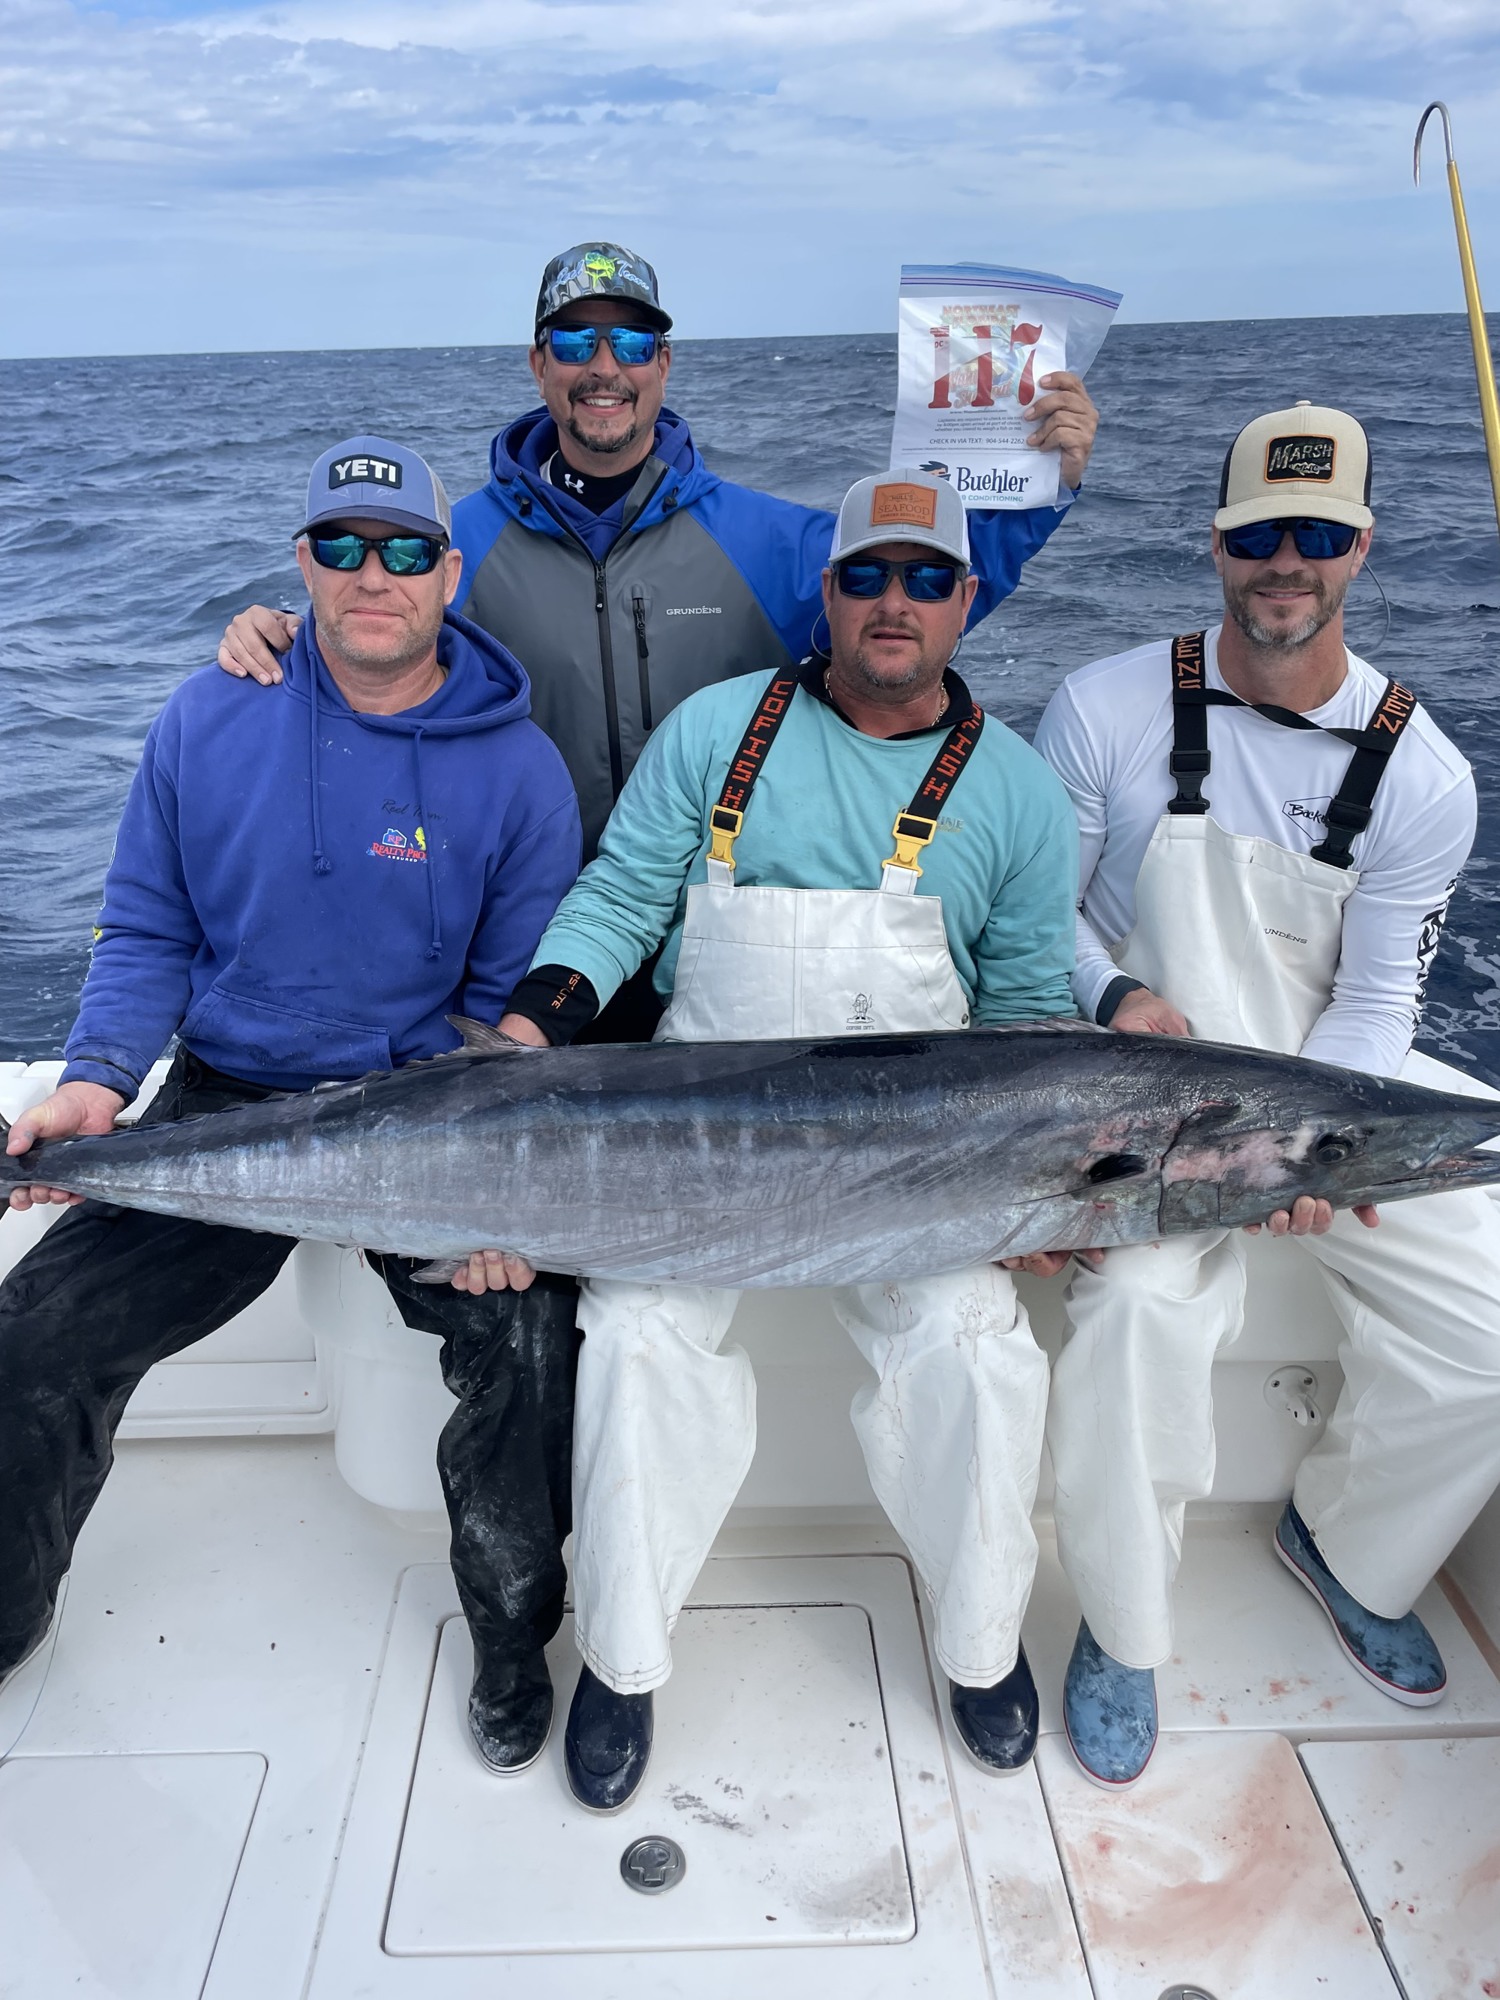 Bill Navarra's crew caught a tournament-record 108.66-pound wahoo on their third day of fishing in the Northeast Florida Wahoo Shootout. Courtesy photo.